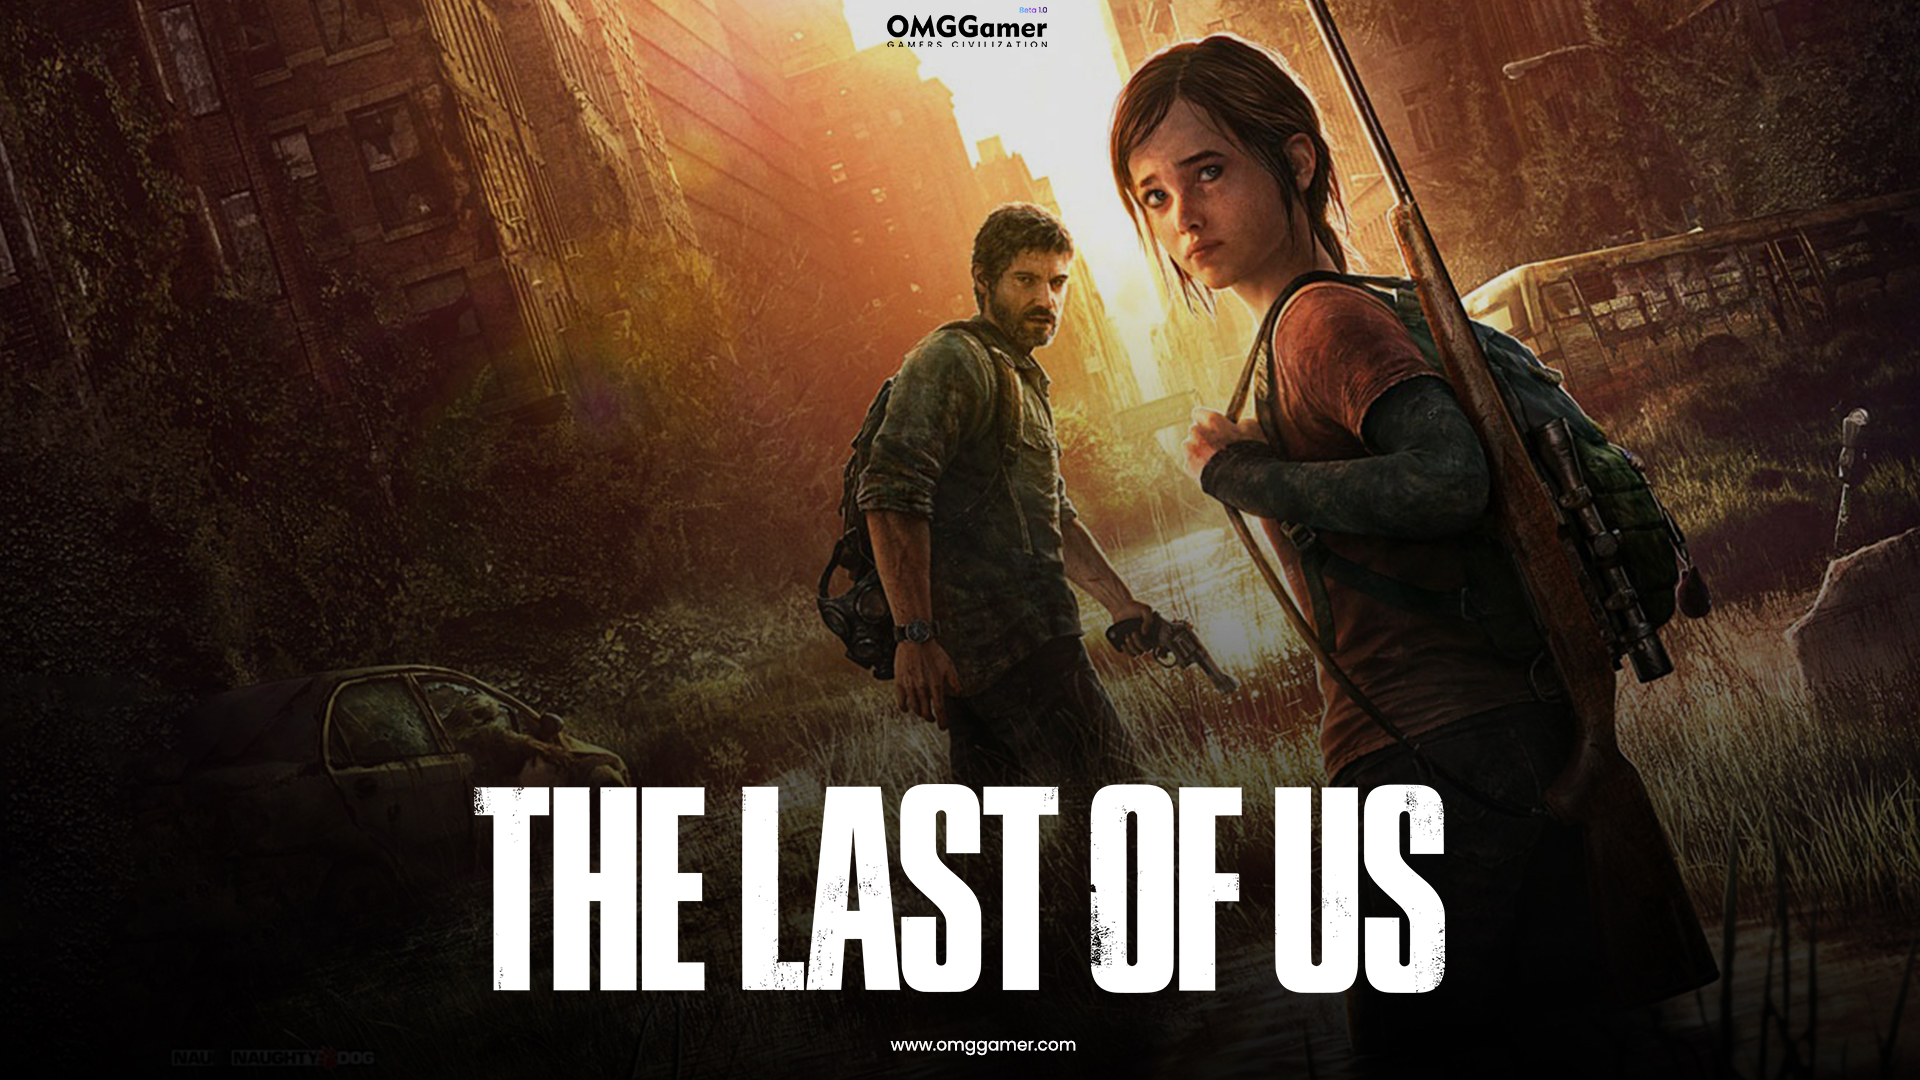 Last of Us PC Release Date [When it is coming]